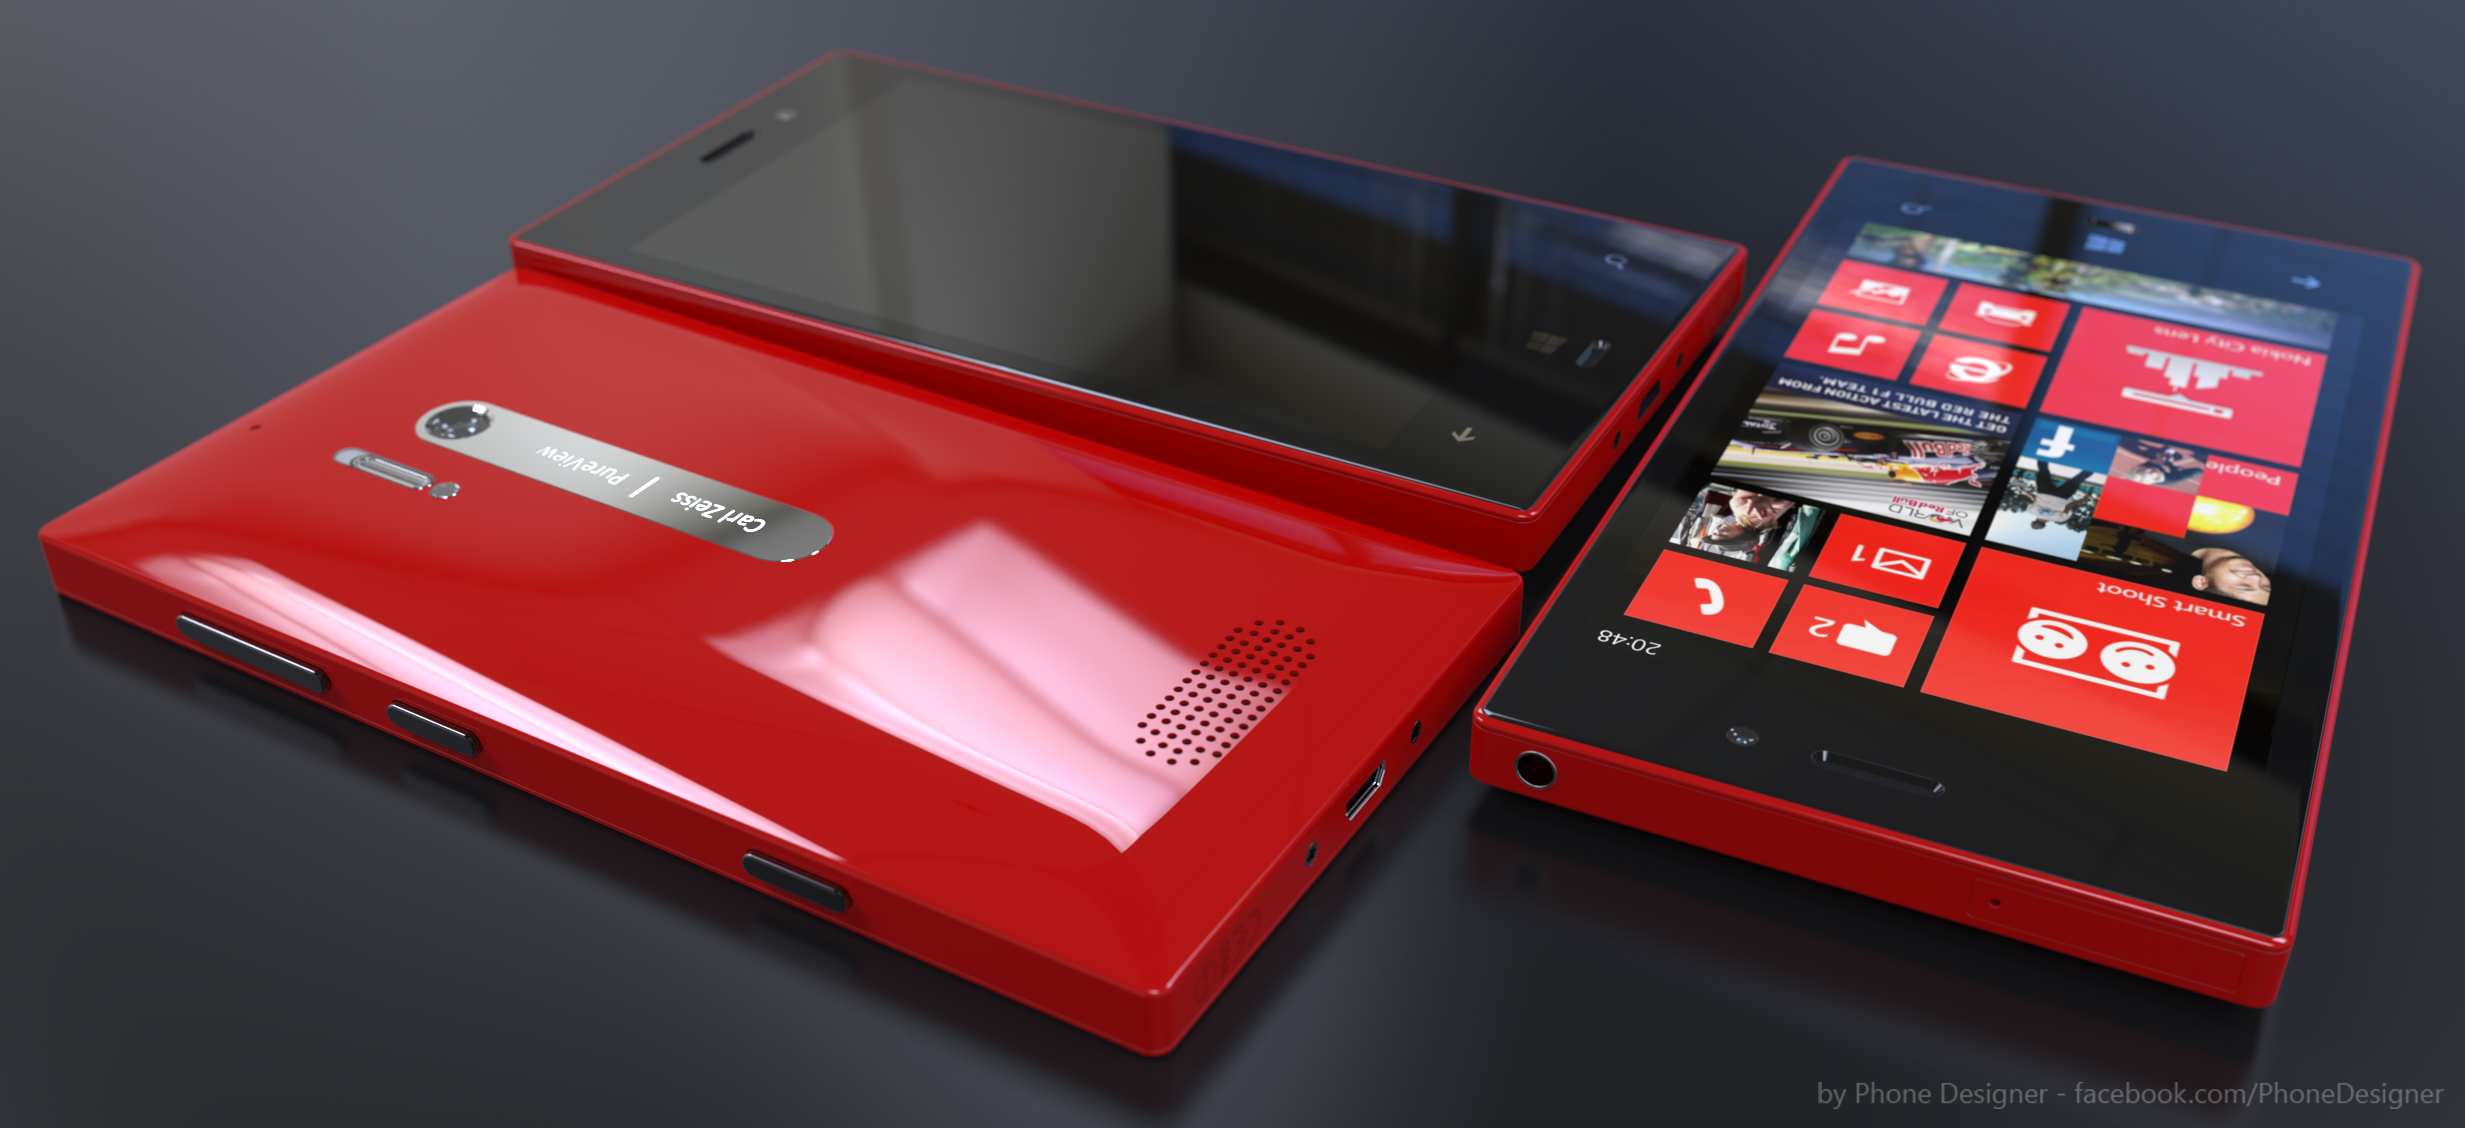 Its New Flagship Windows Phone Lumia Leawo Official